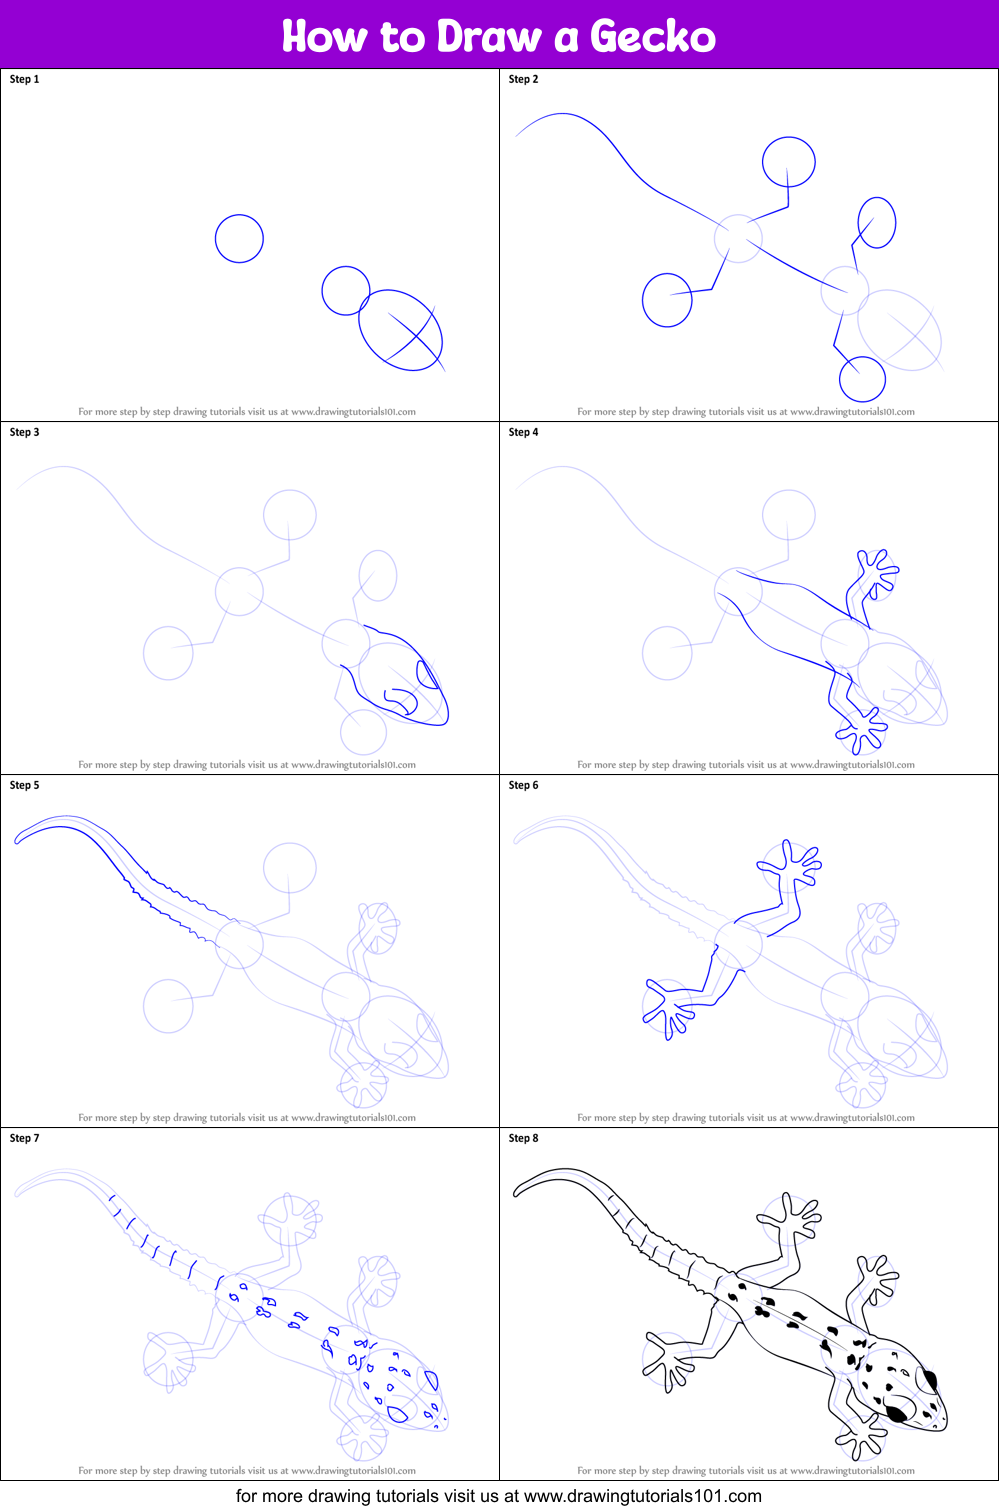 How to Draw a Gecko printable step by step drawing sheet